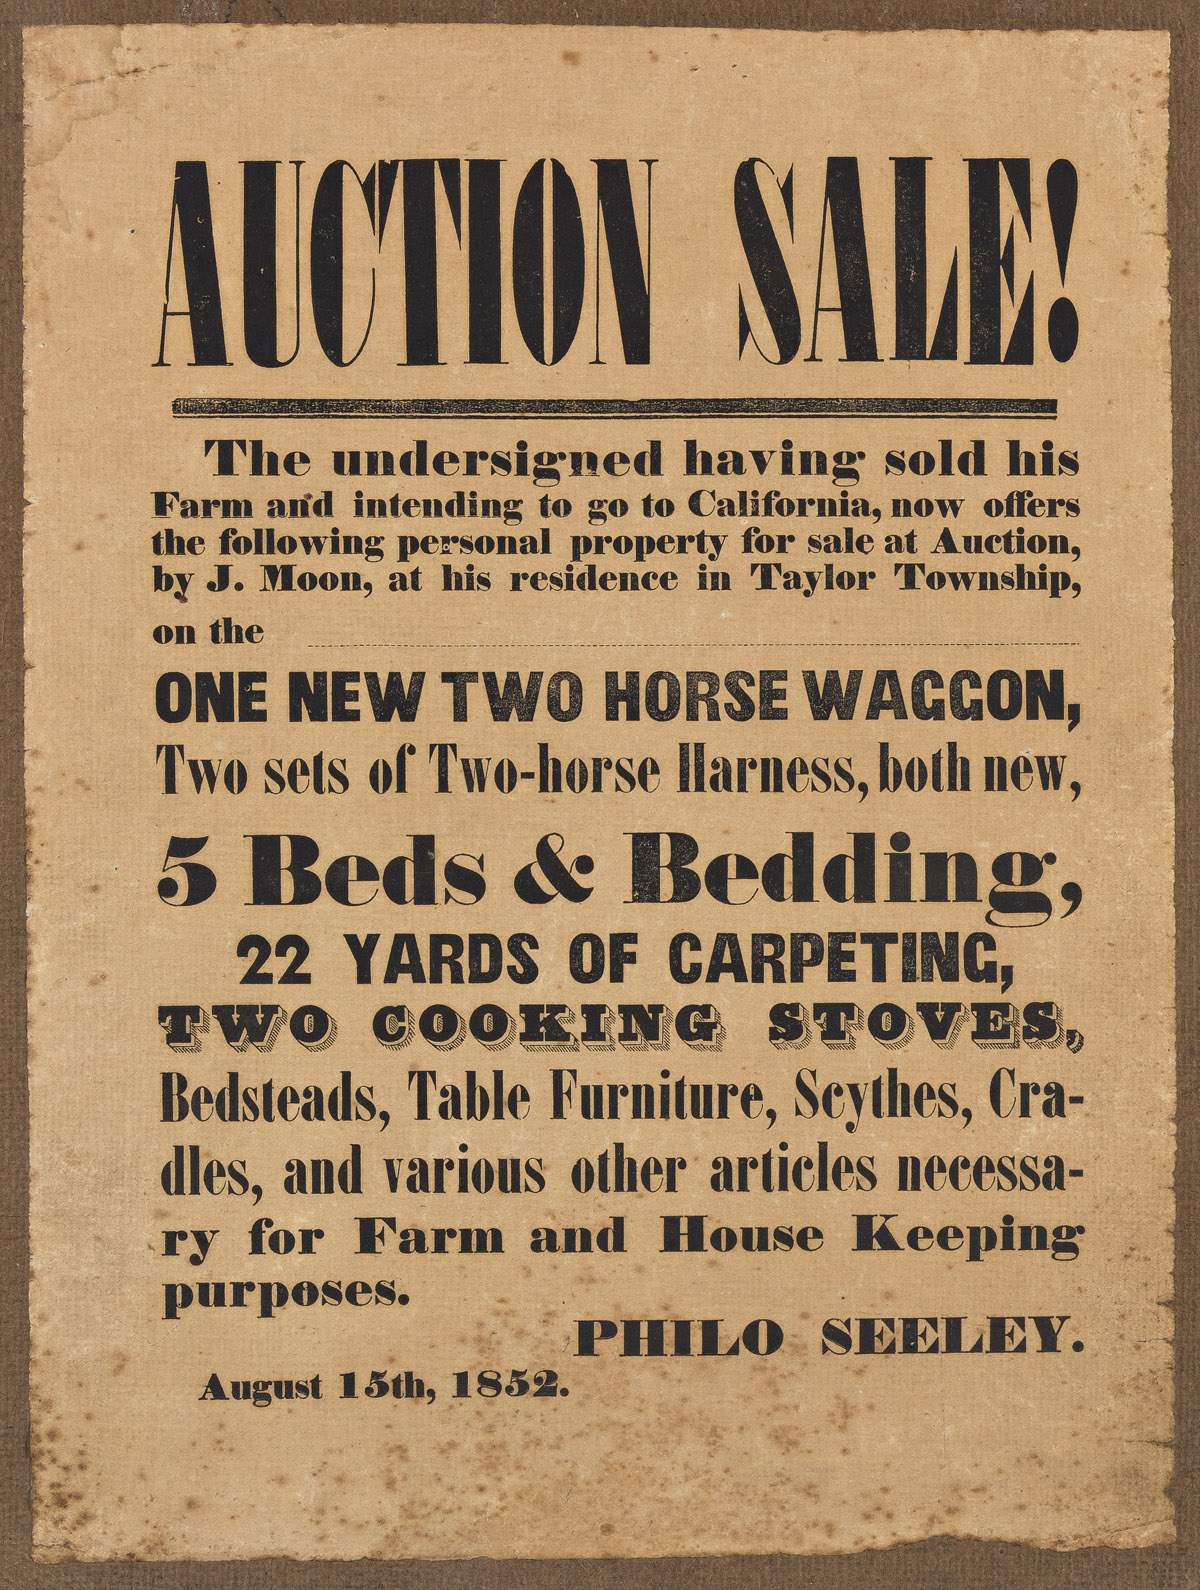 (CALIFORNIA.) Auction Sale! The Undersigned Having Sold his Farm and Intending to Go to California . . .